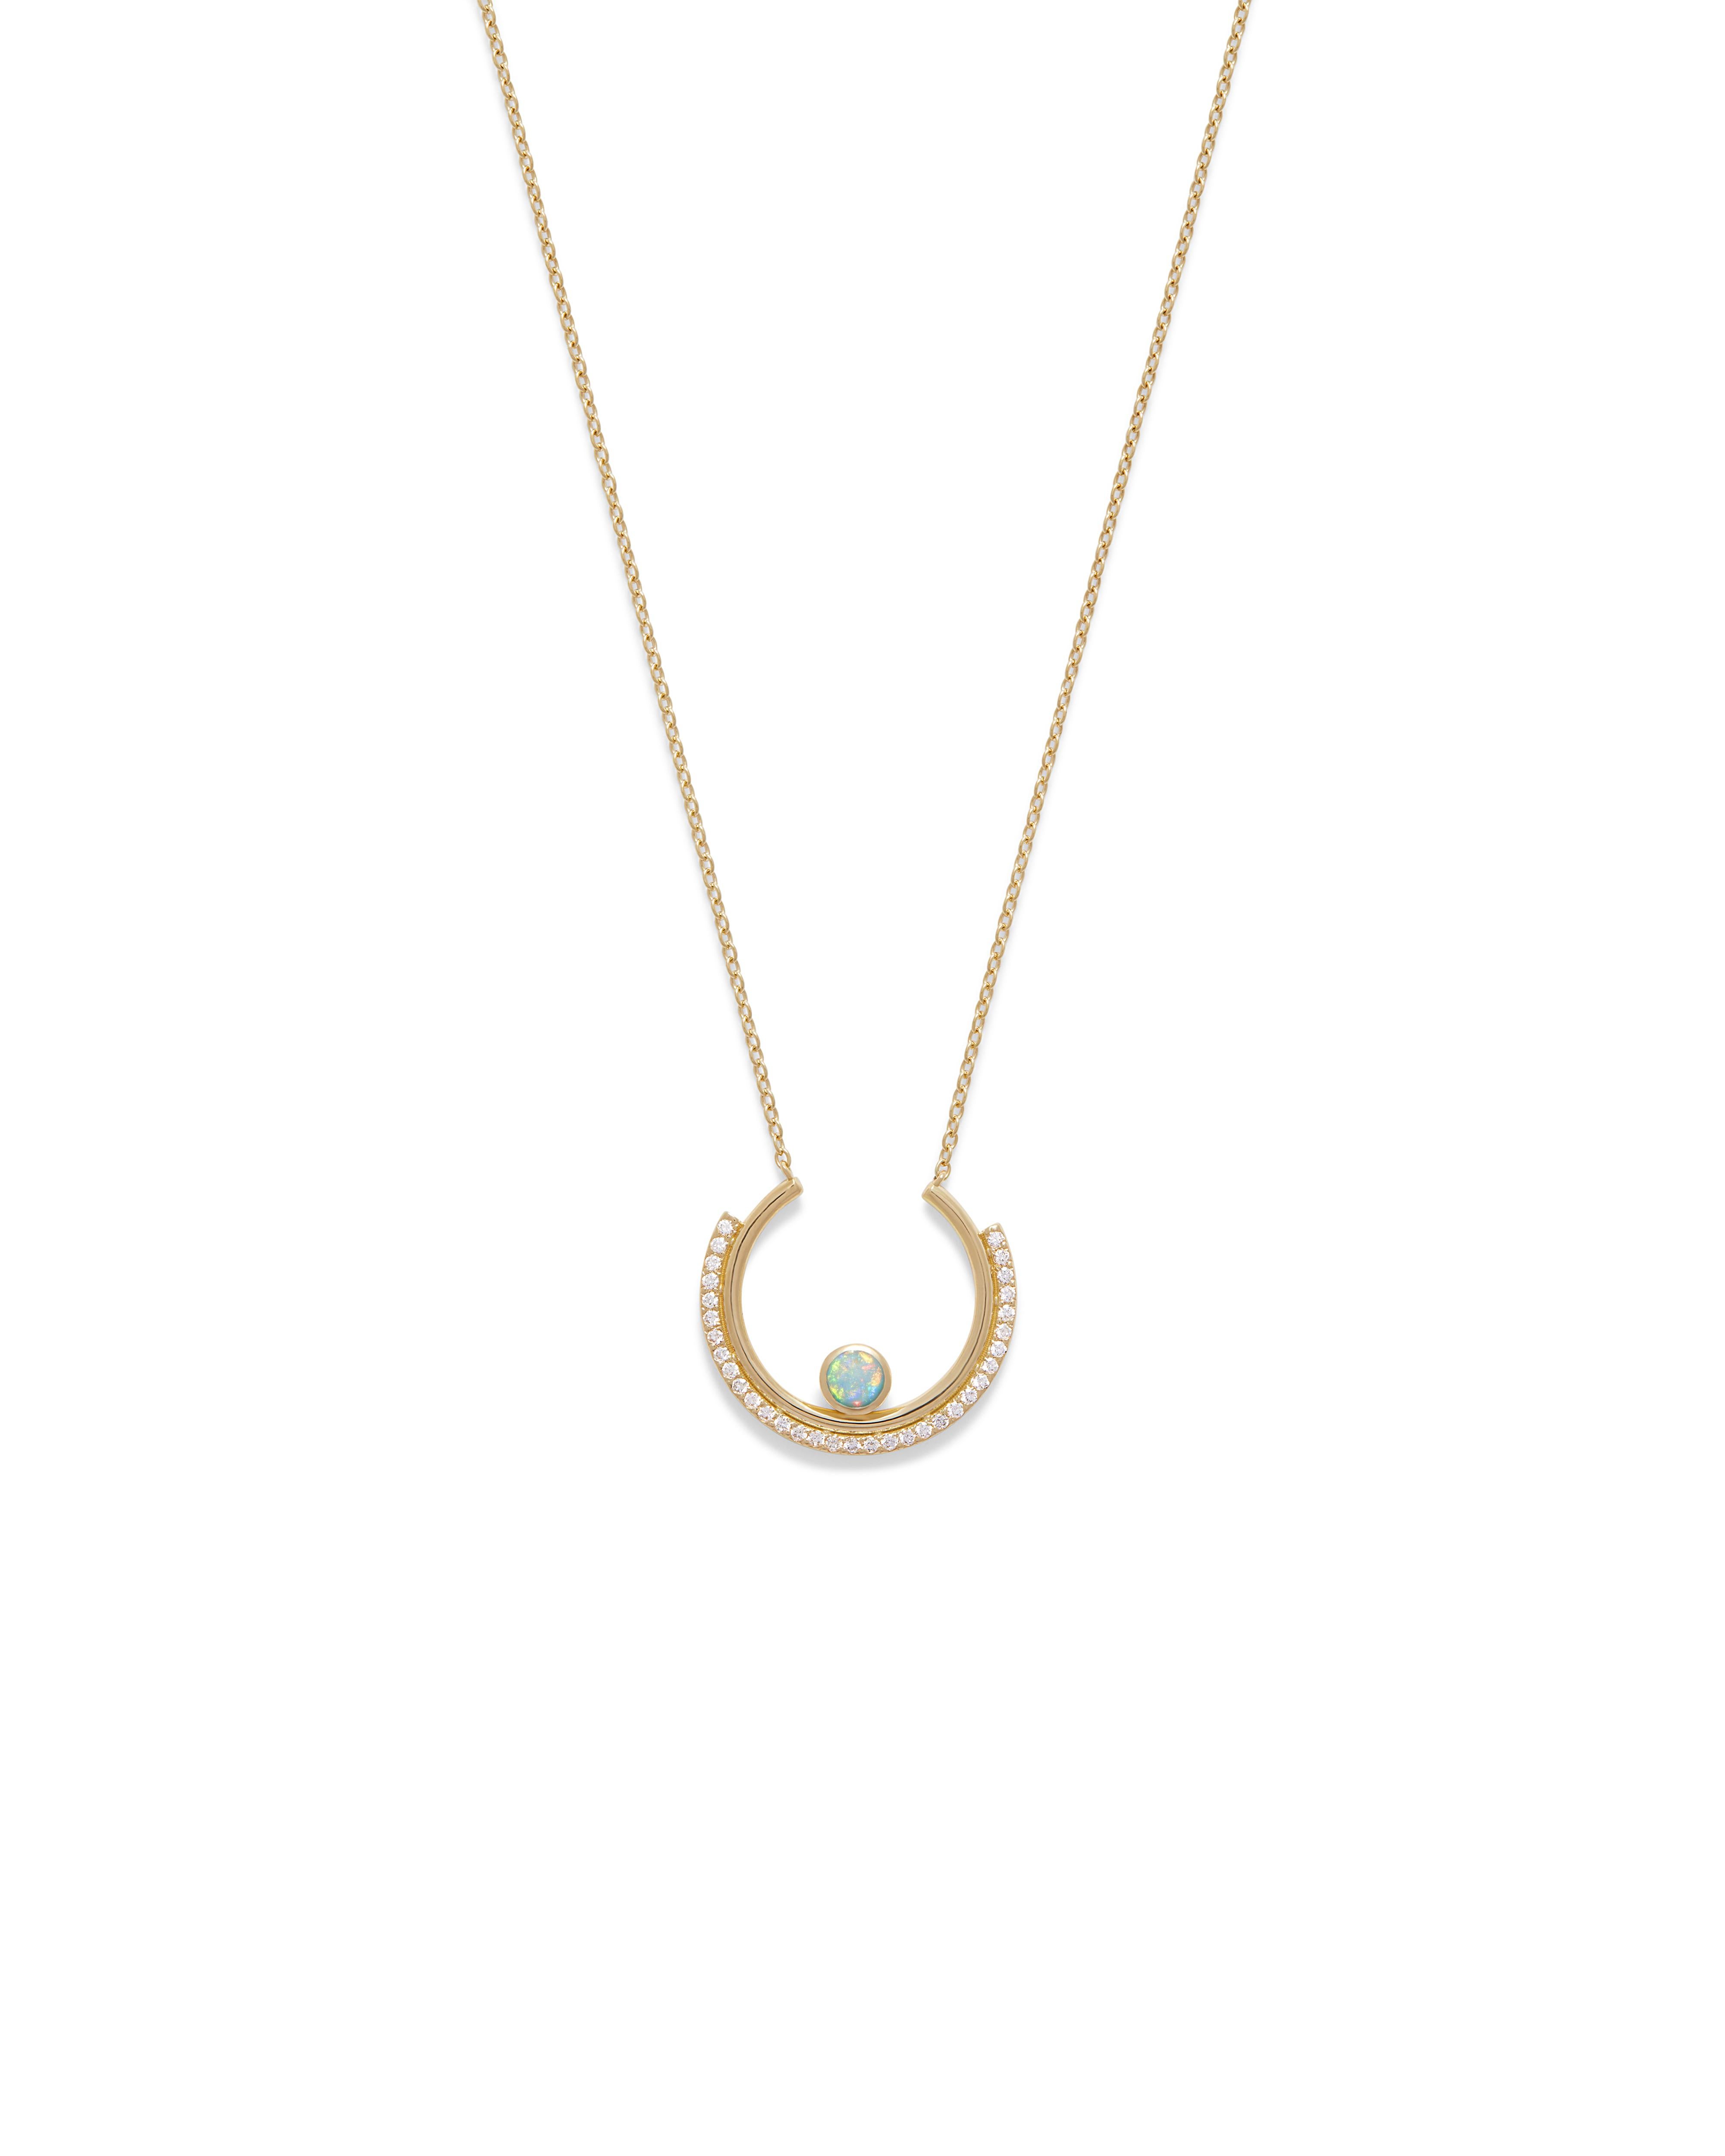 Contemporary Casey Perez Gold Arc Necklace with Opal and Brilliant Cut Diamonds on Gold Chain For Sale